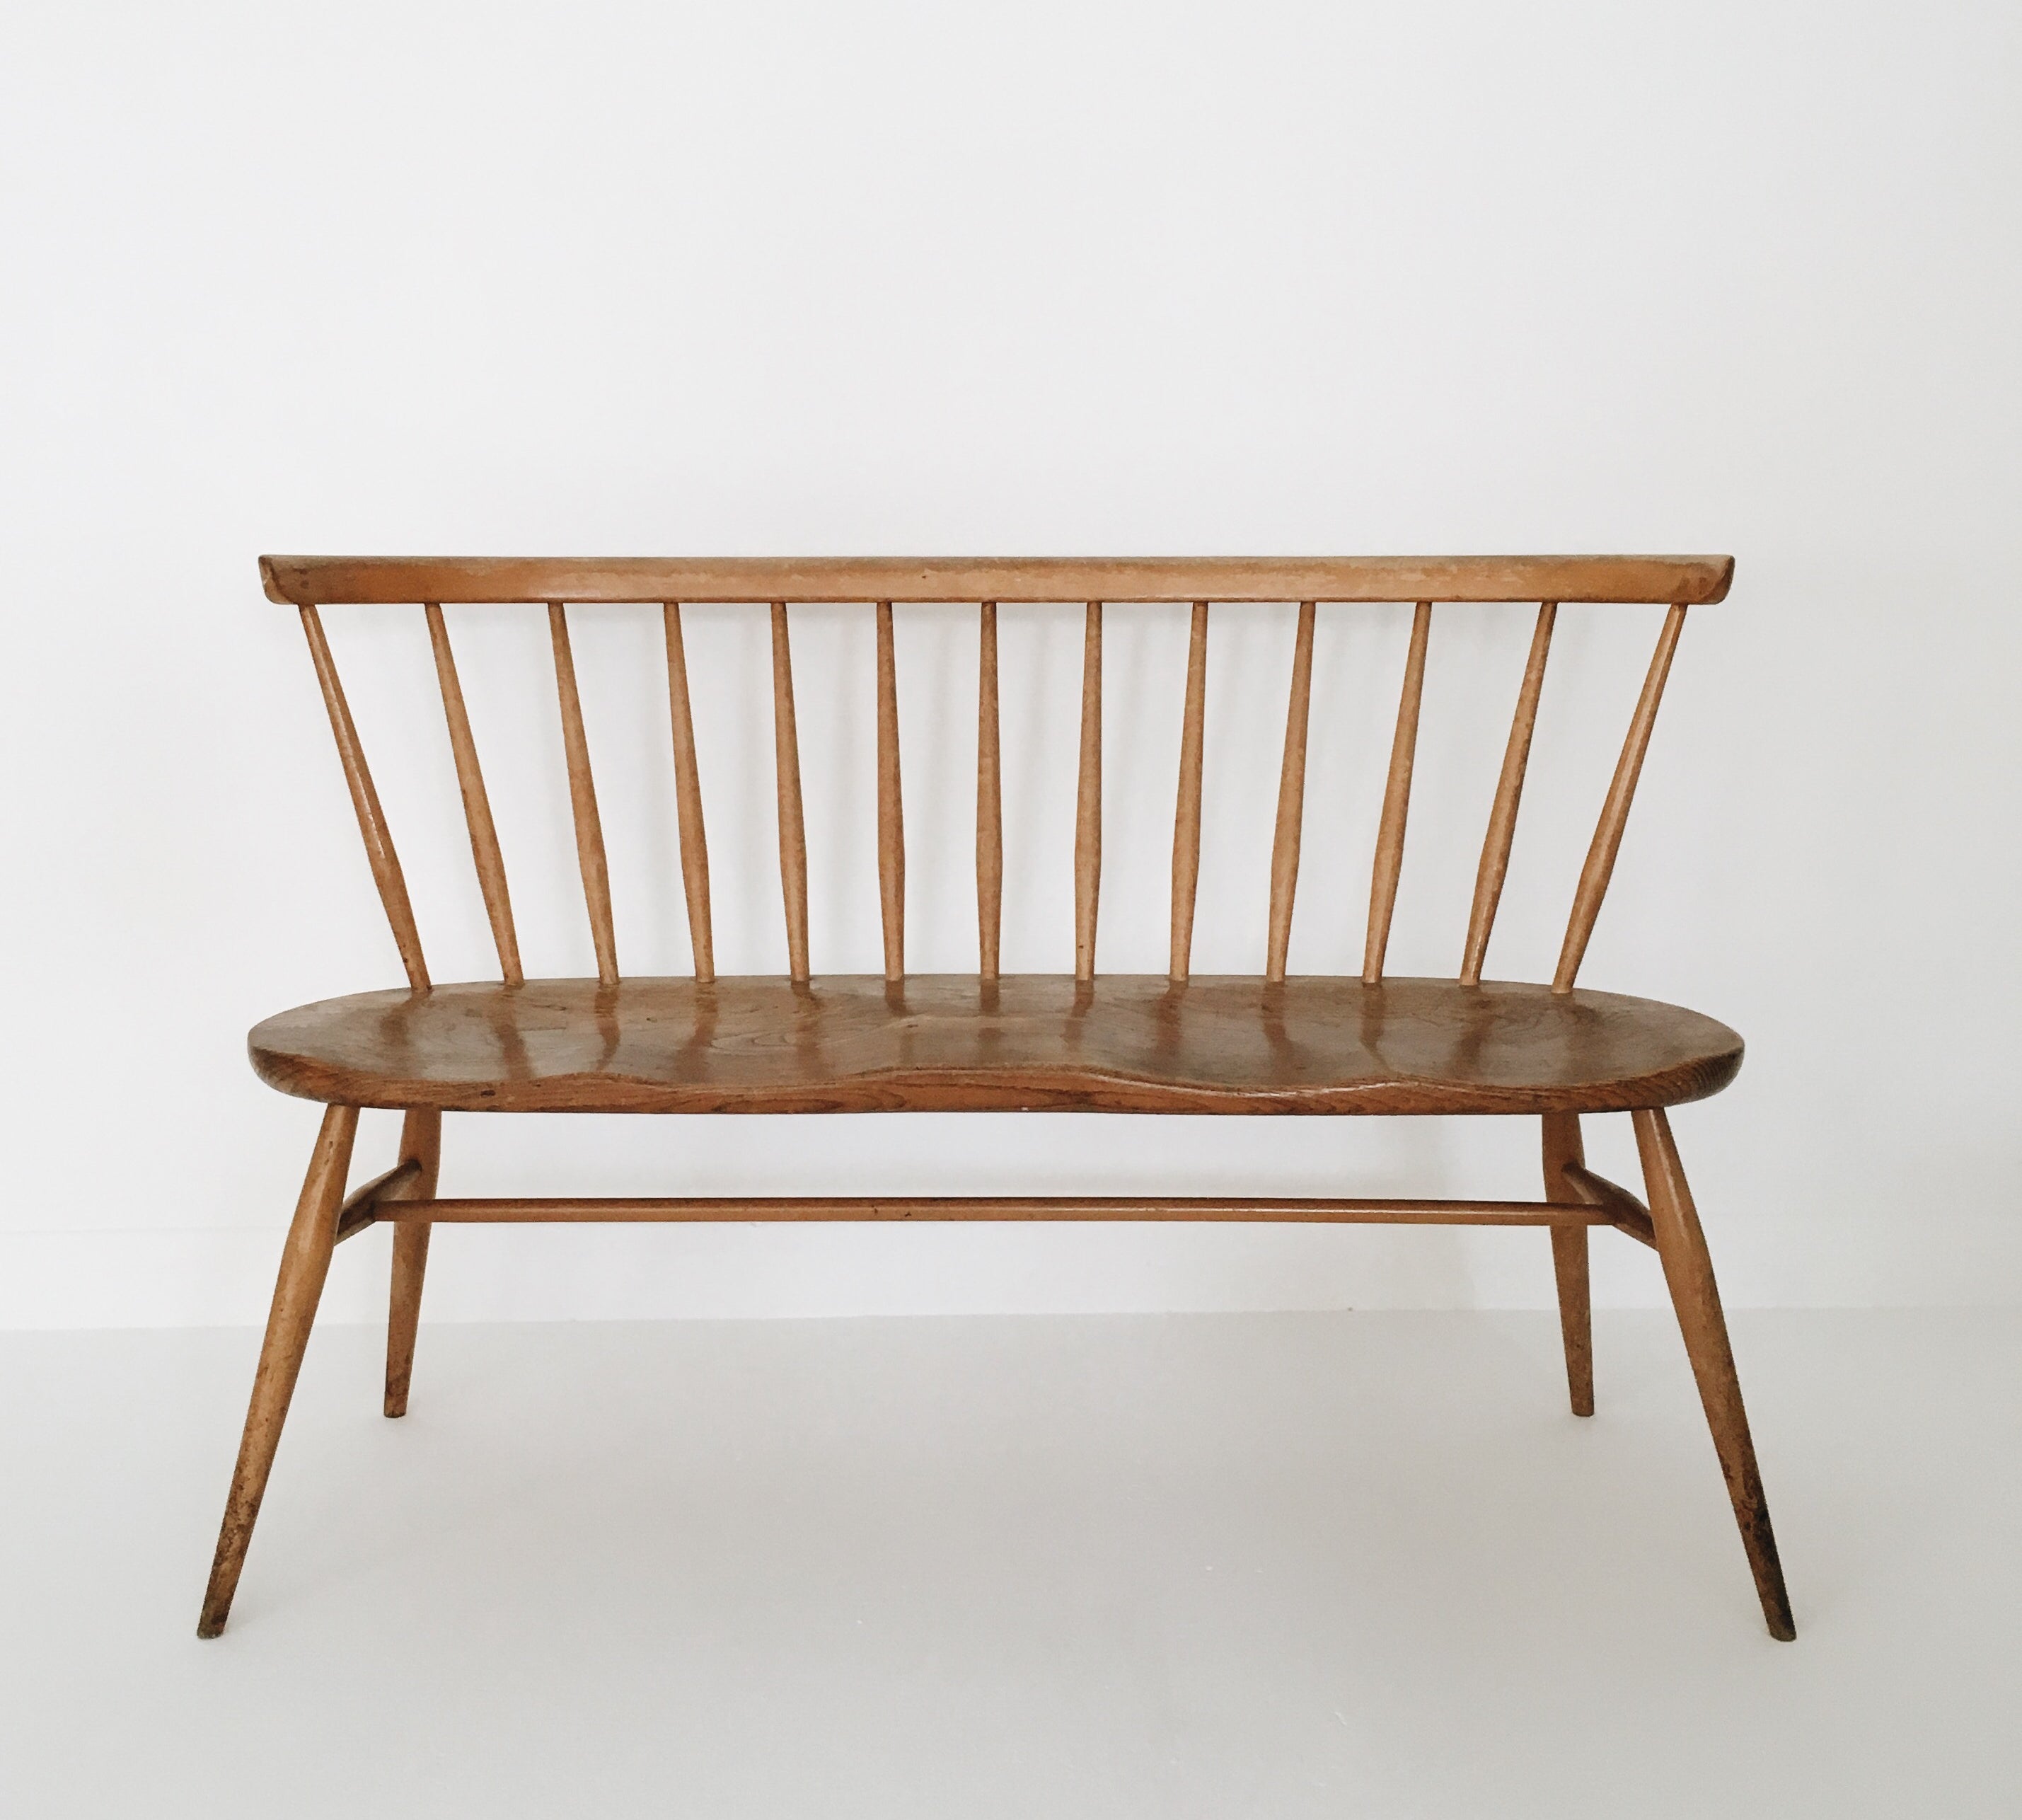 Vintage Ercol love seat - Tea and Kate